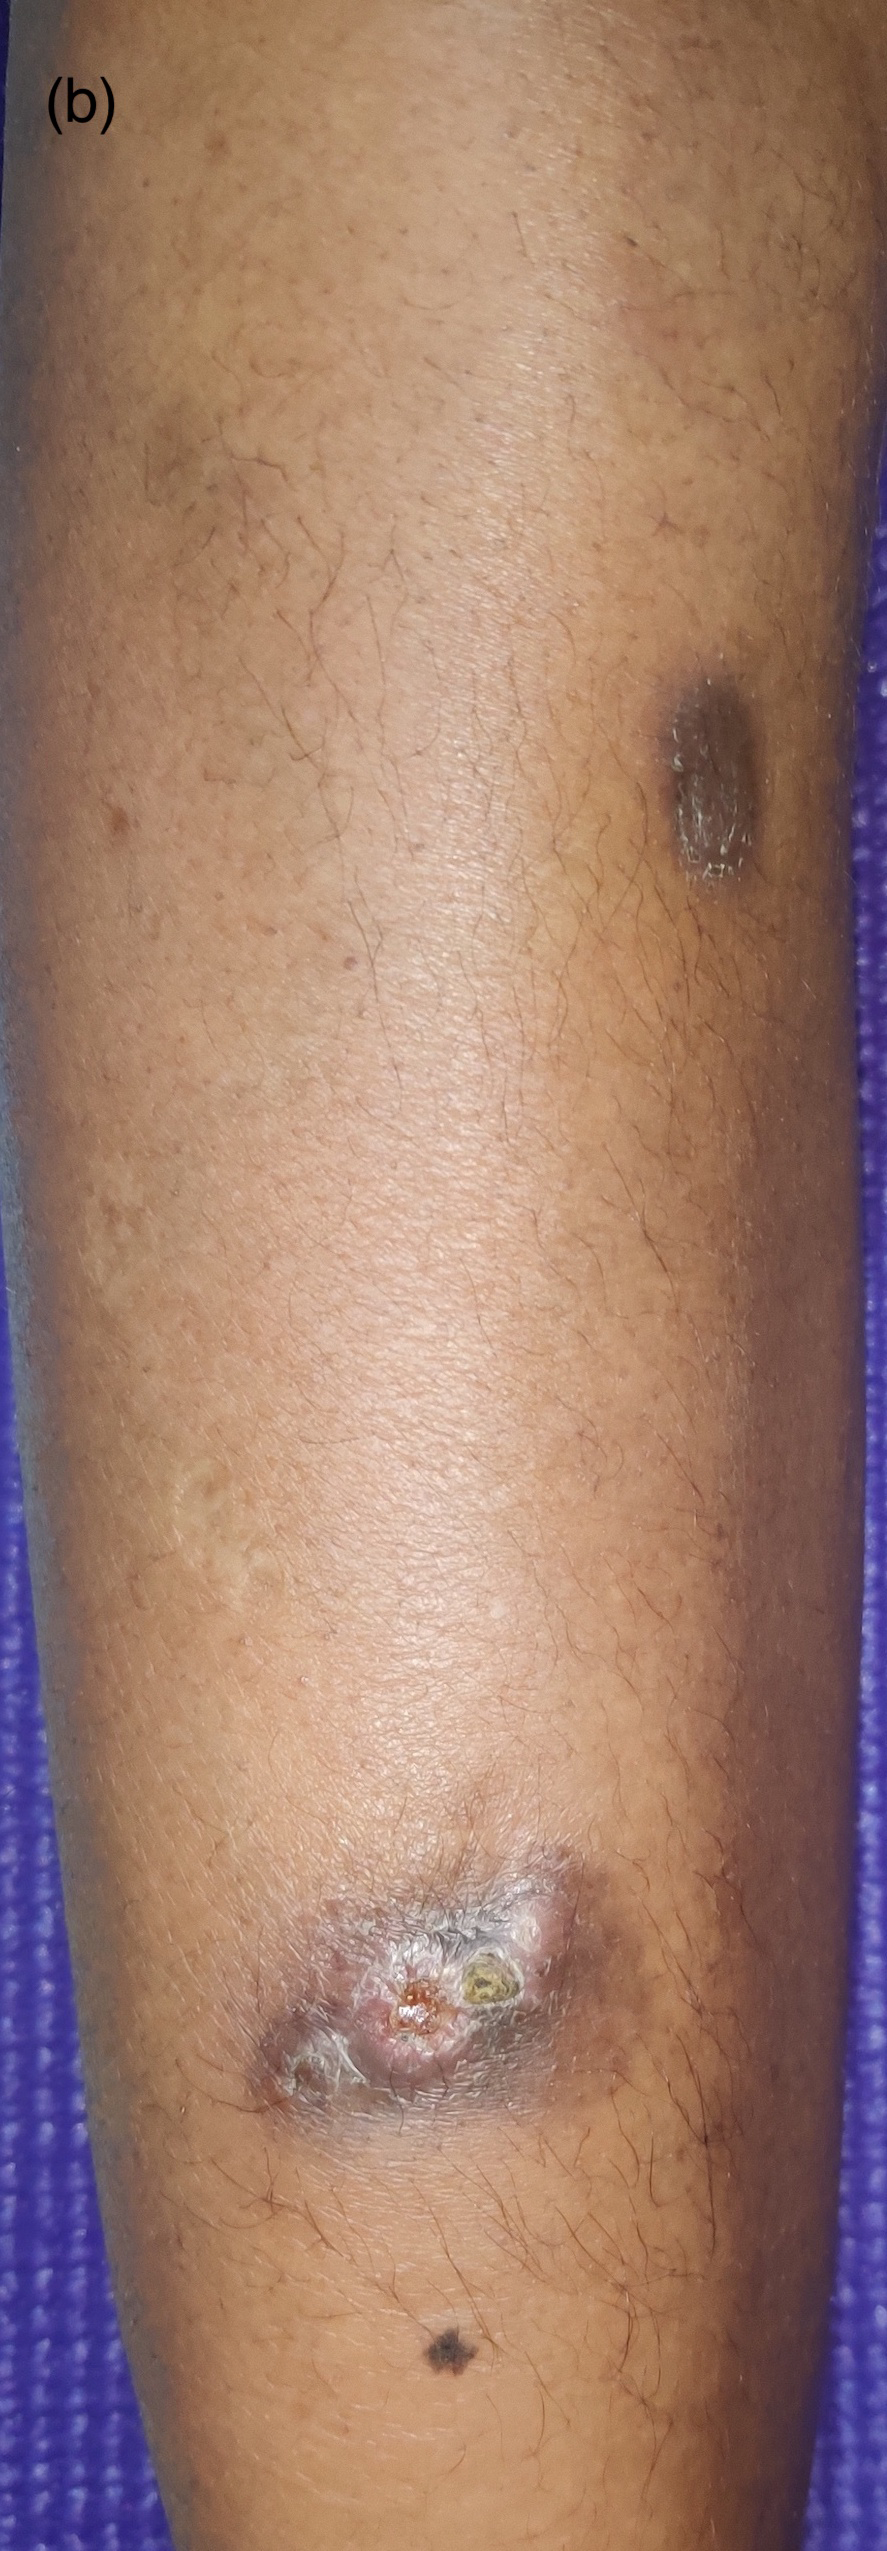 Two fluctuant abscesses over the right leg